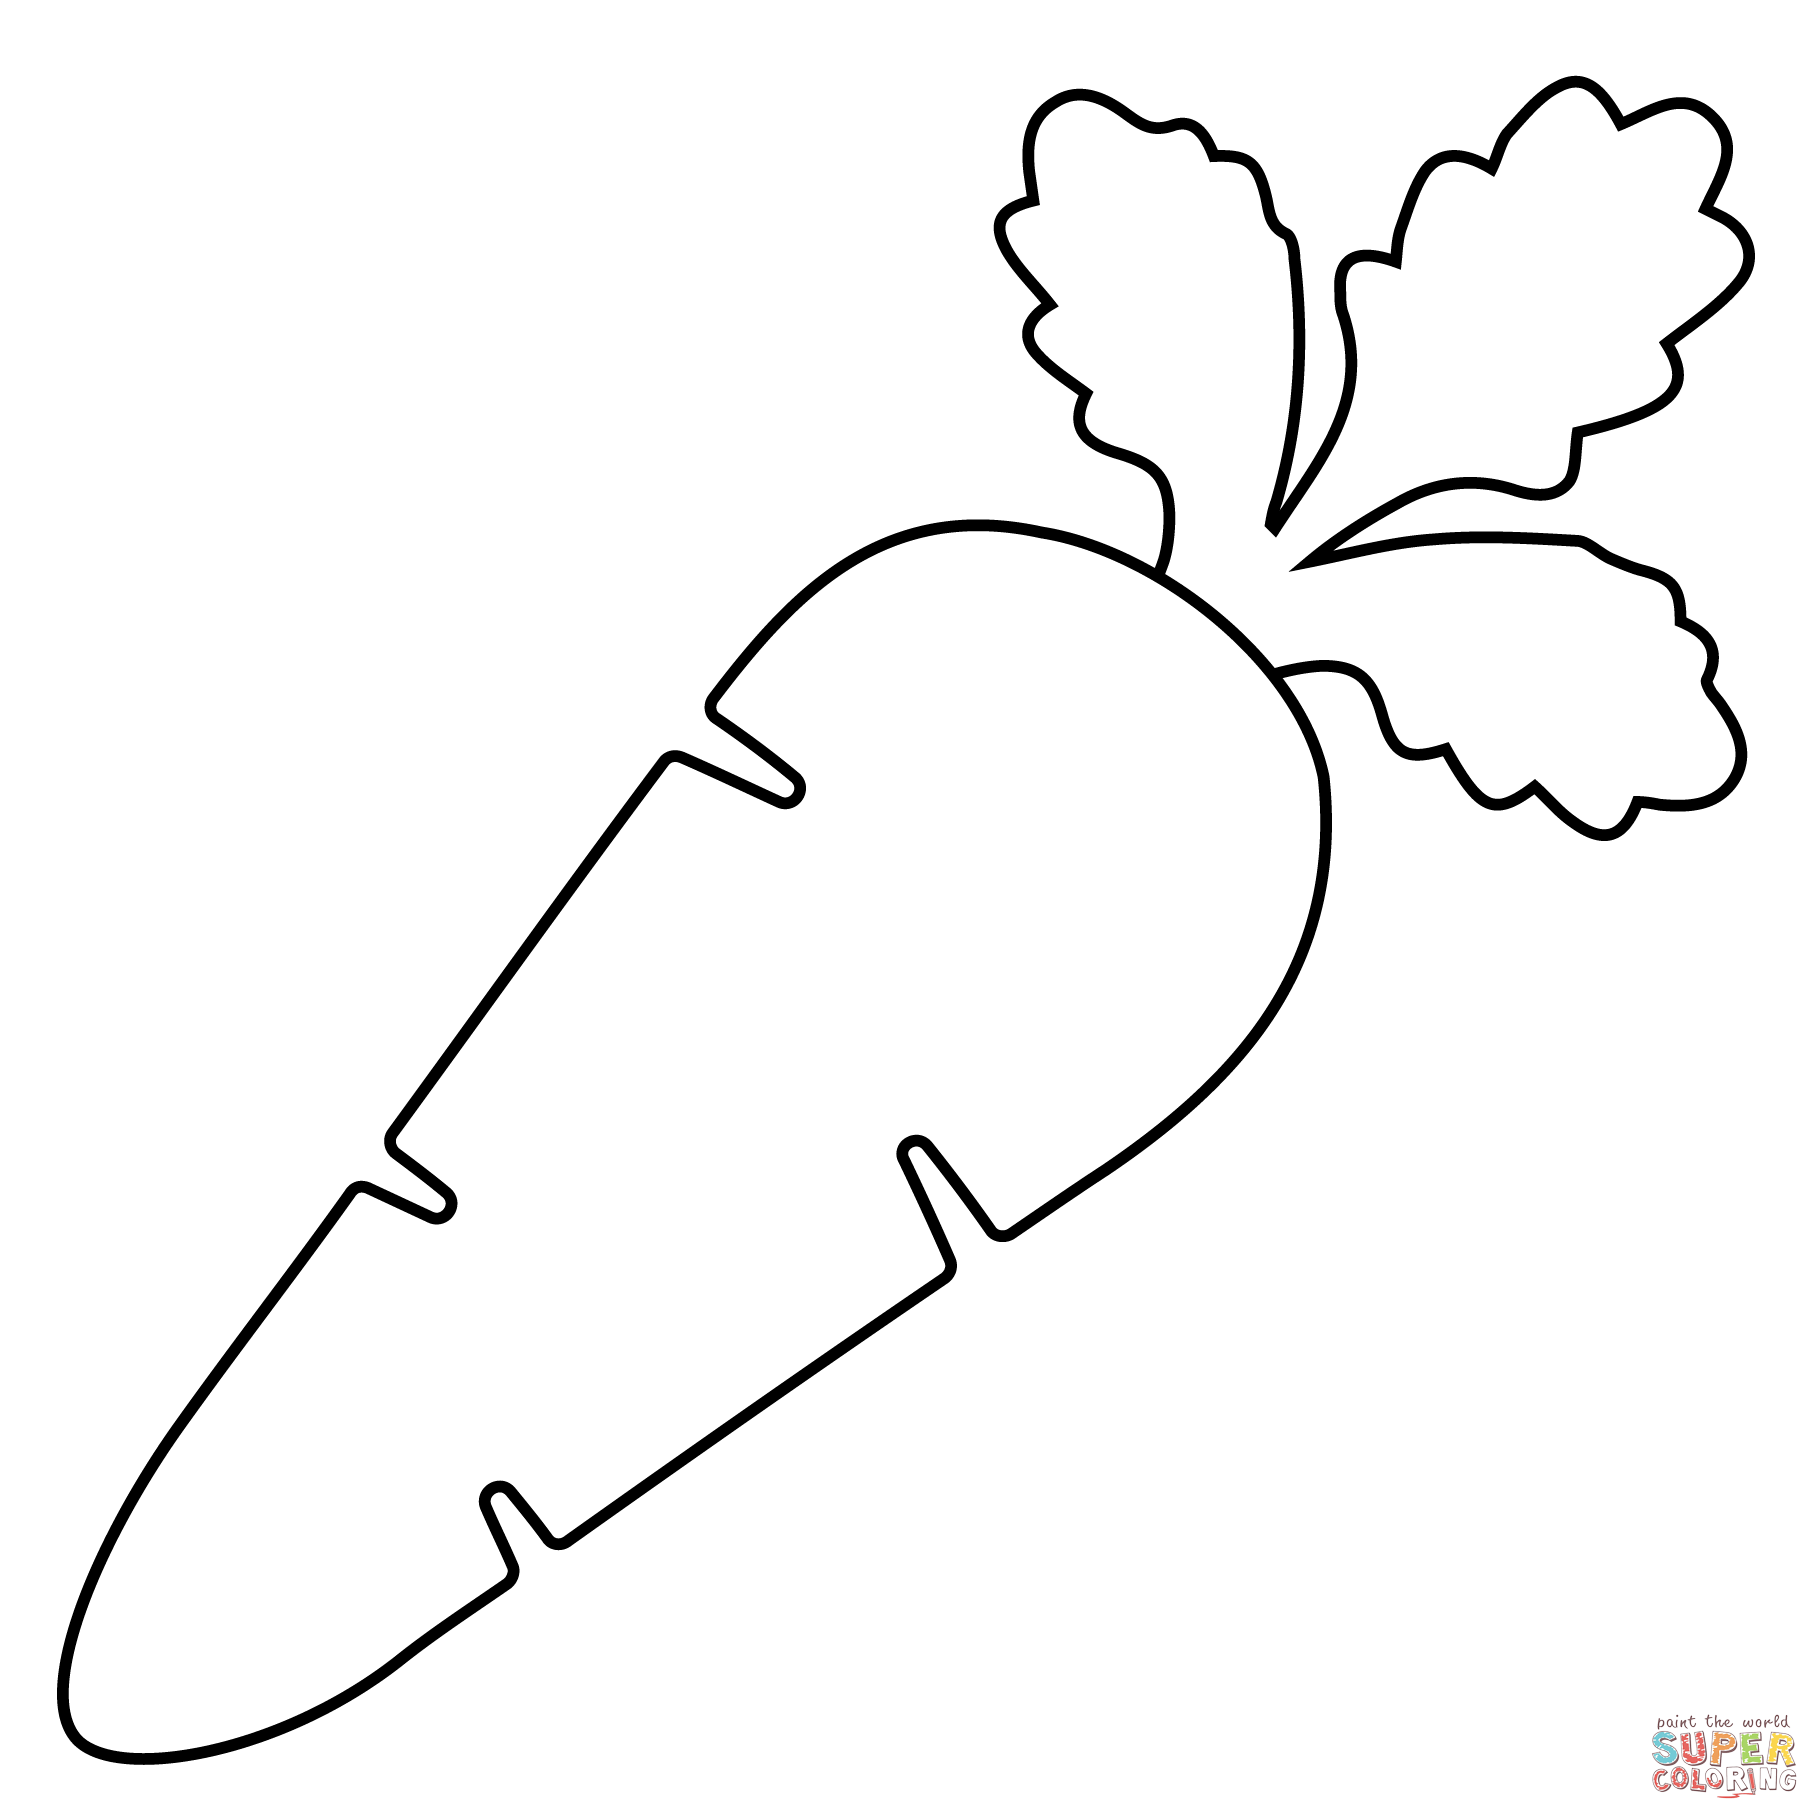 Carrot emoji coloring page free printable coloring pages